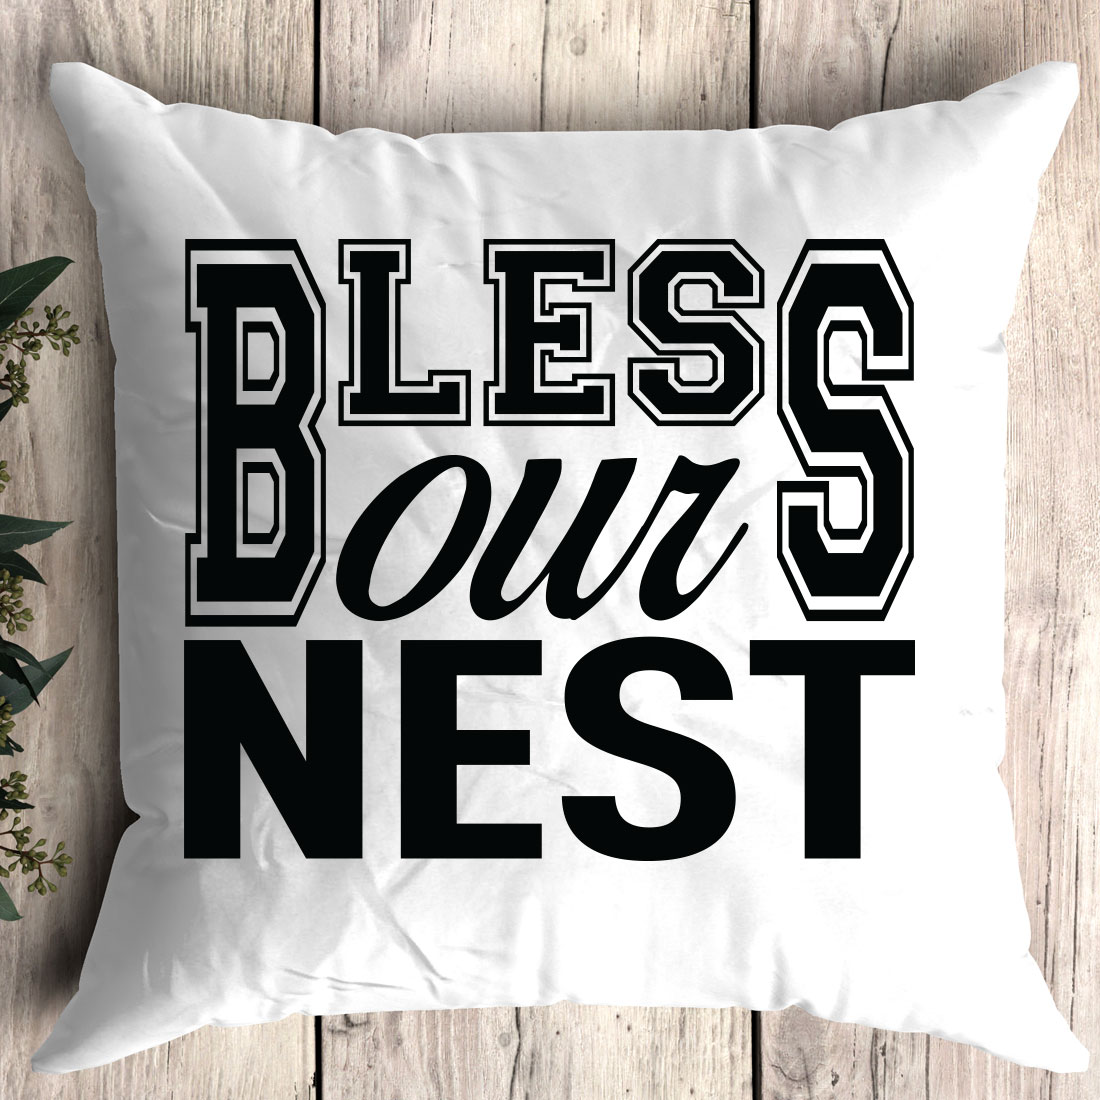 White pillow with the words bliss down nest on it.